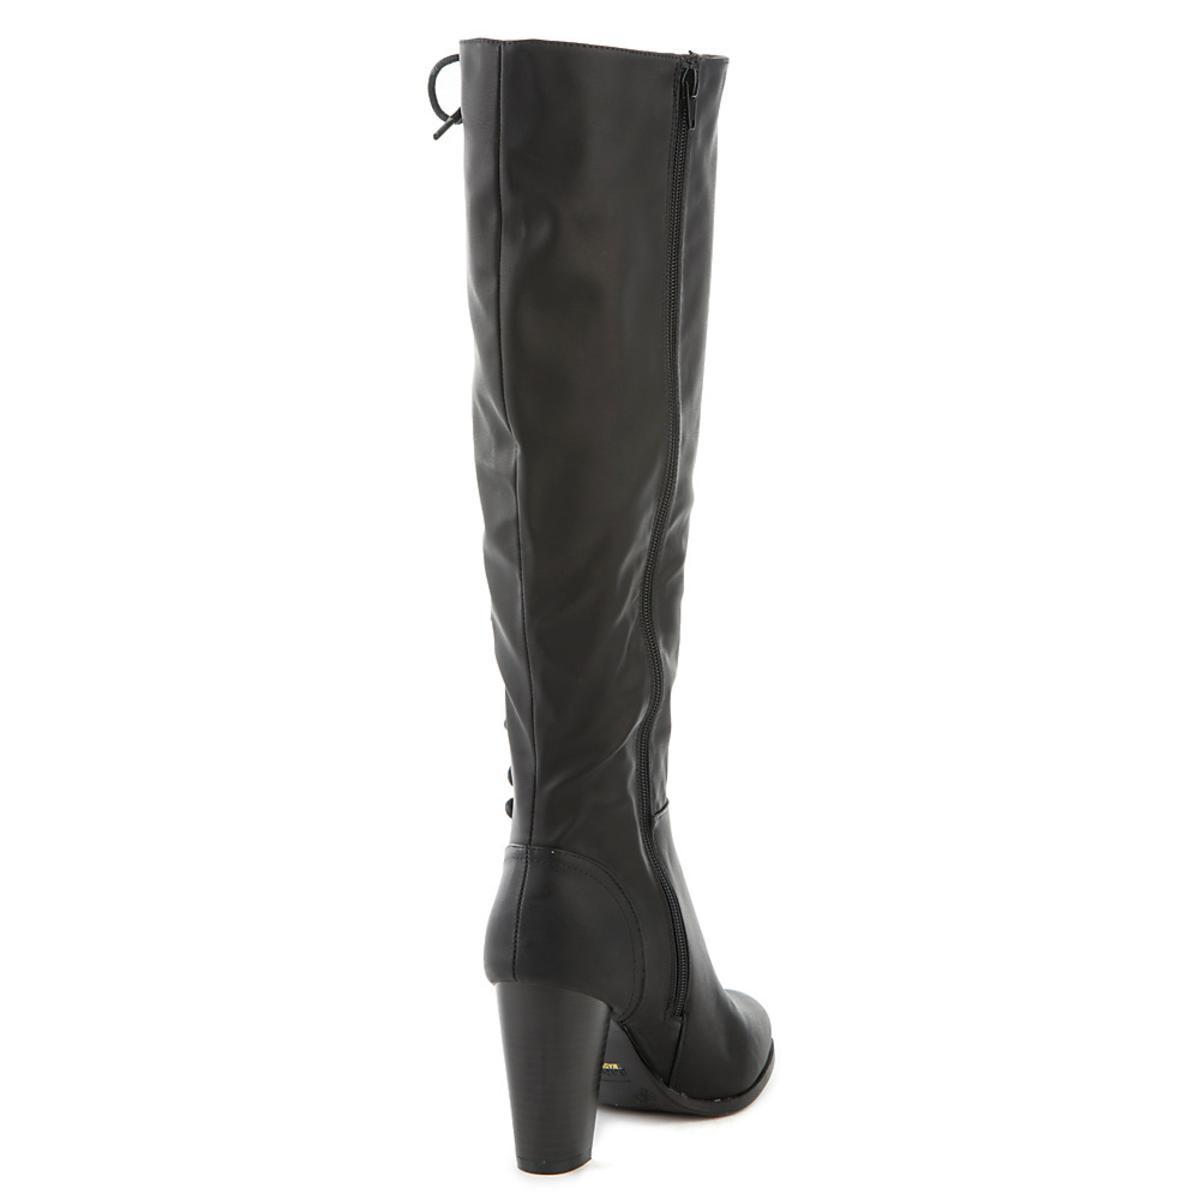 Cheek-08S Knee-High Lace-Up Boot Black